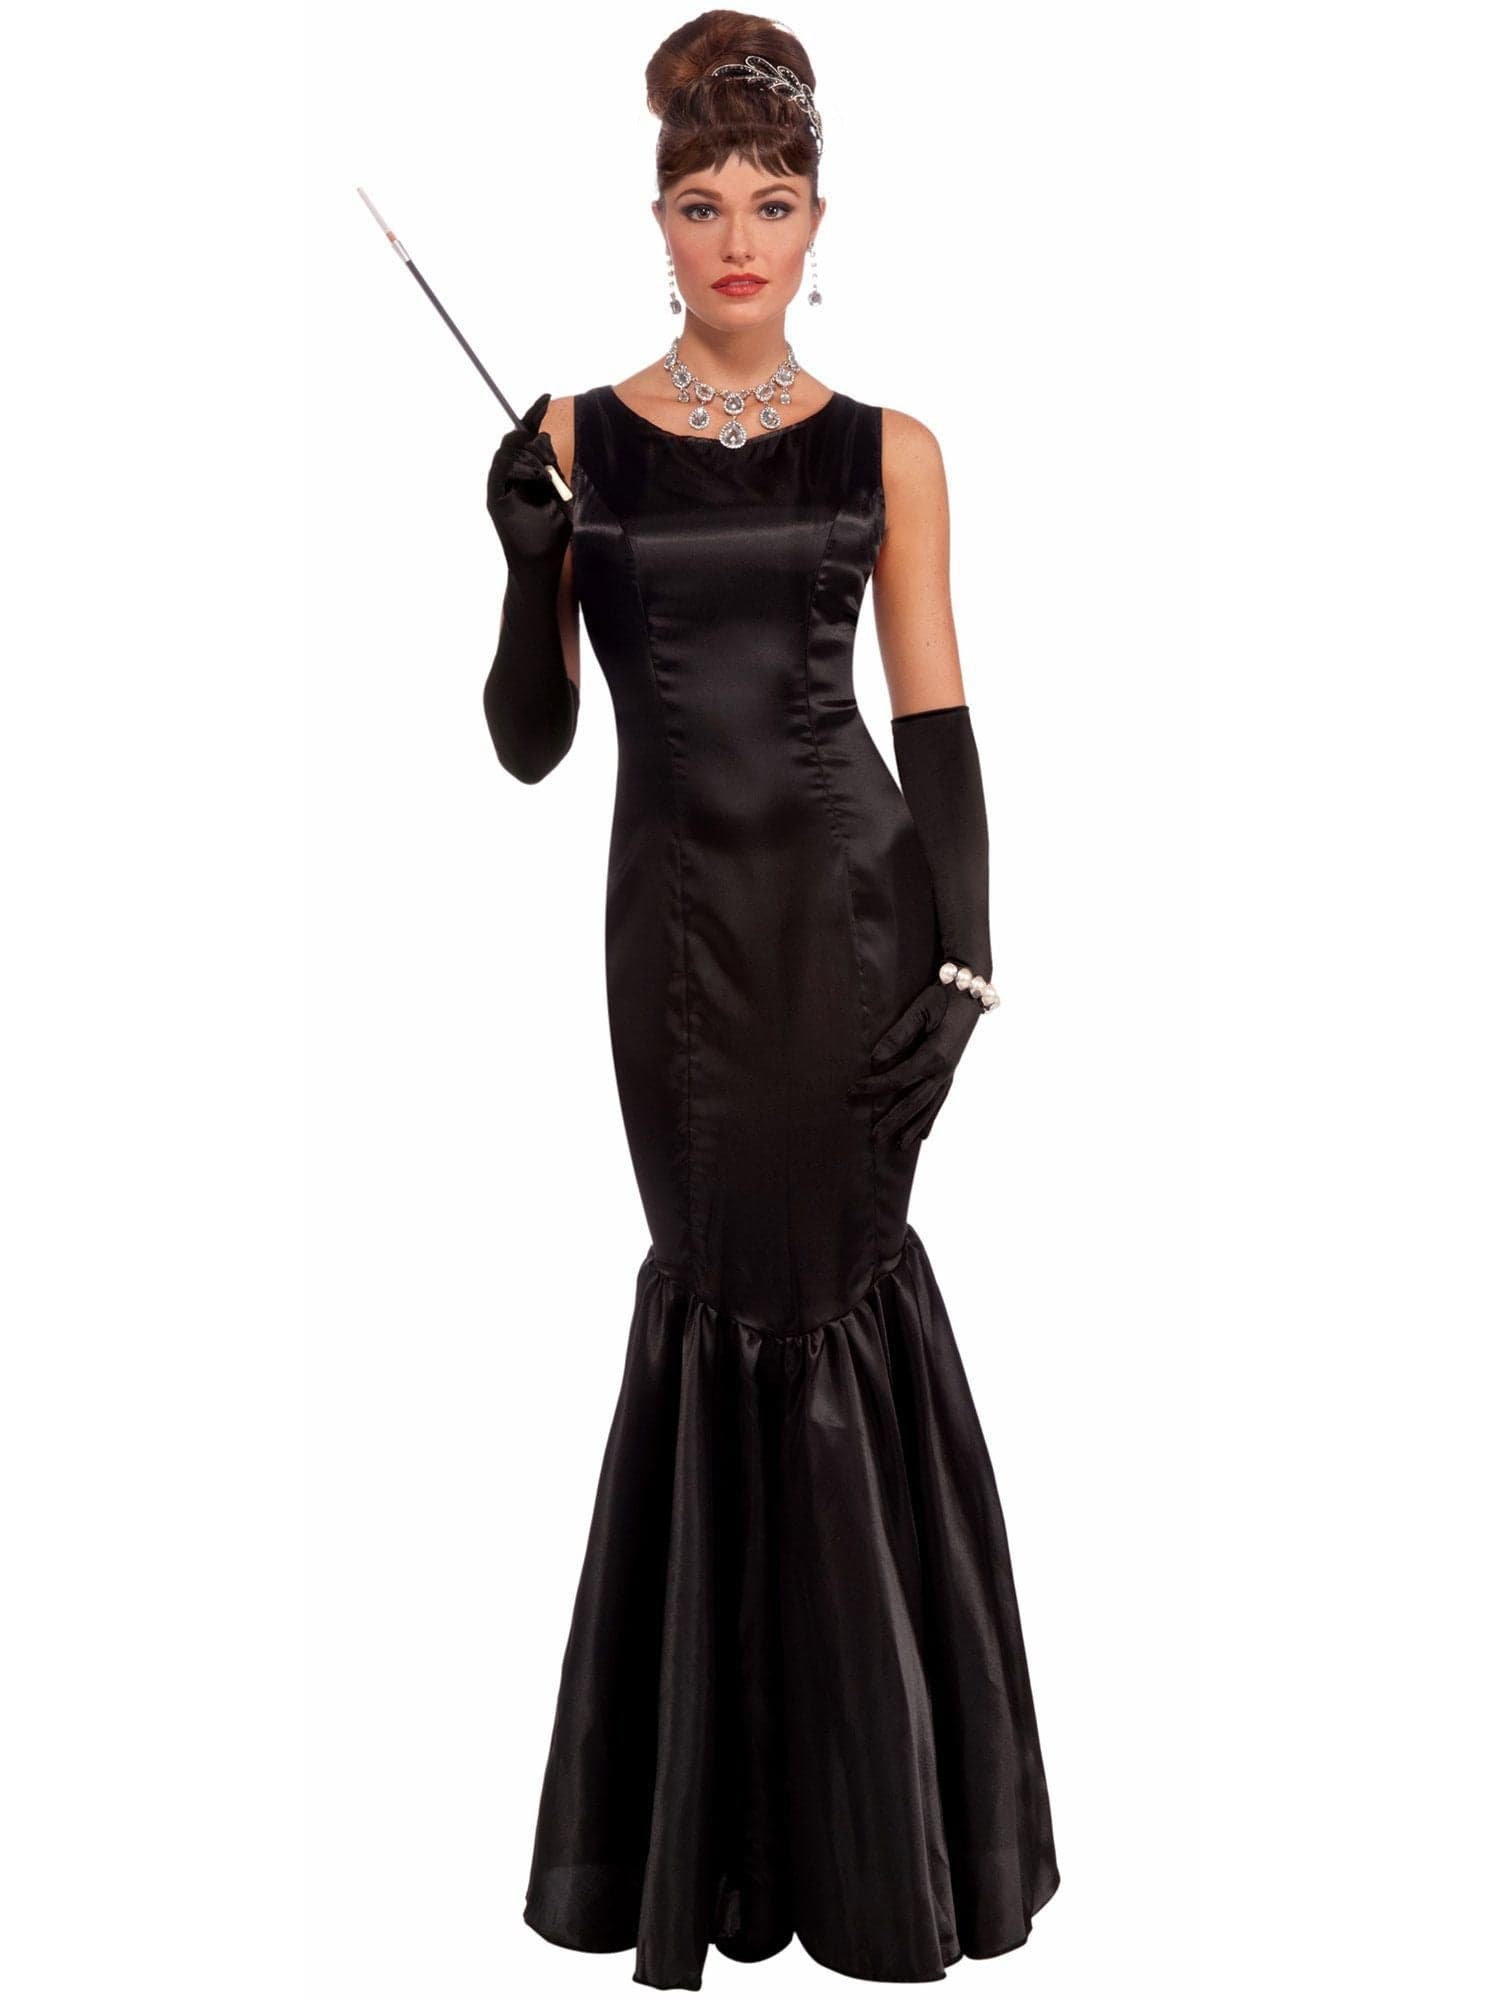 Adult Vintage Hollywood High Society Costume - costumes.com